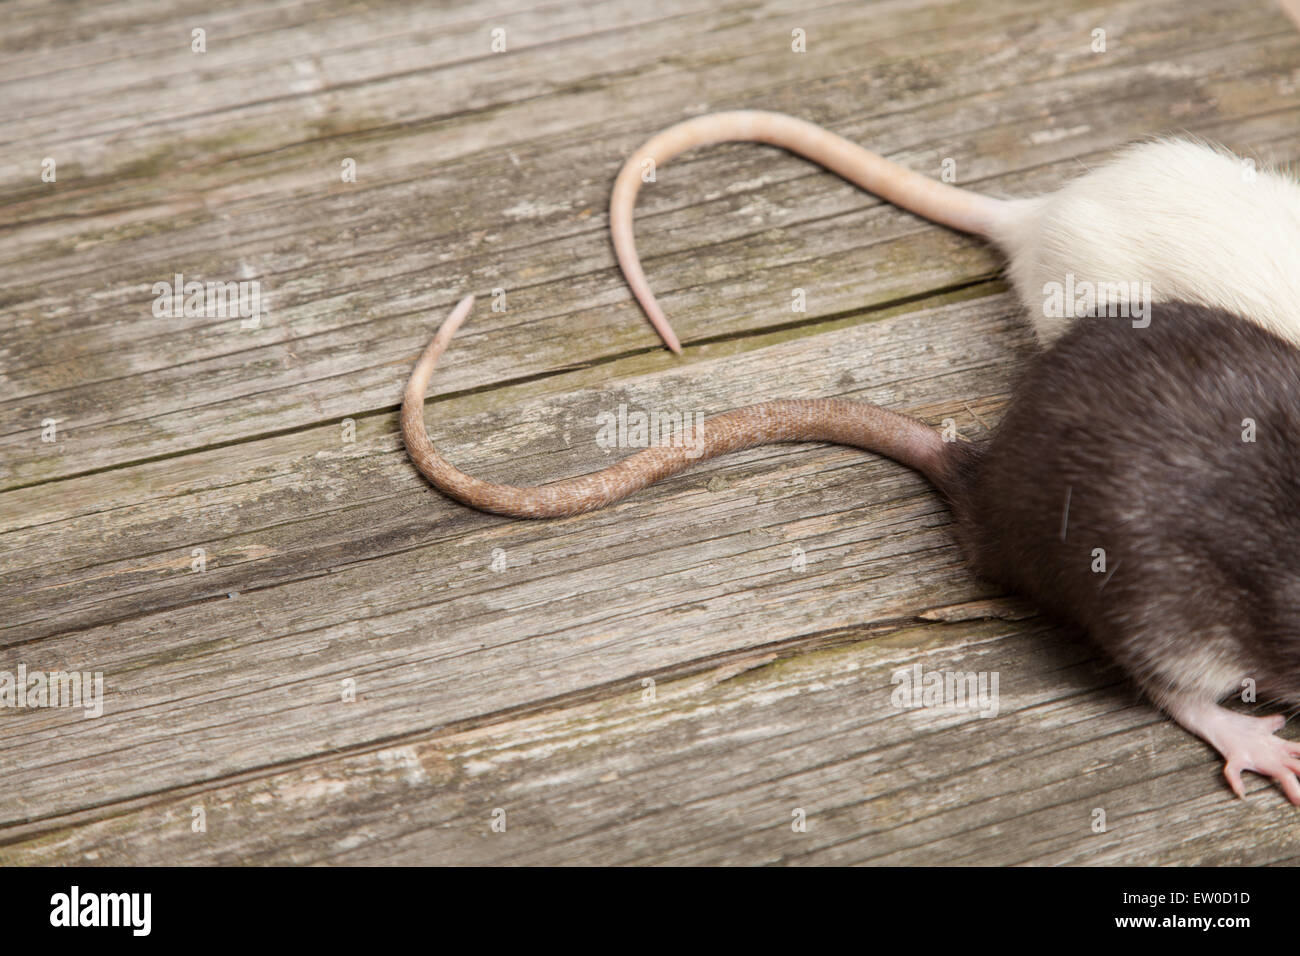 Tails of rats on a wooden table Stock Photo